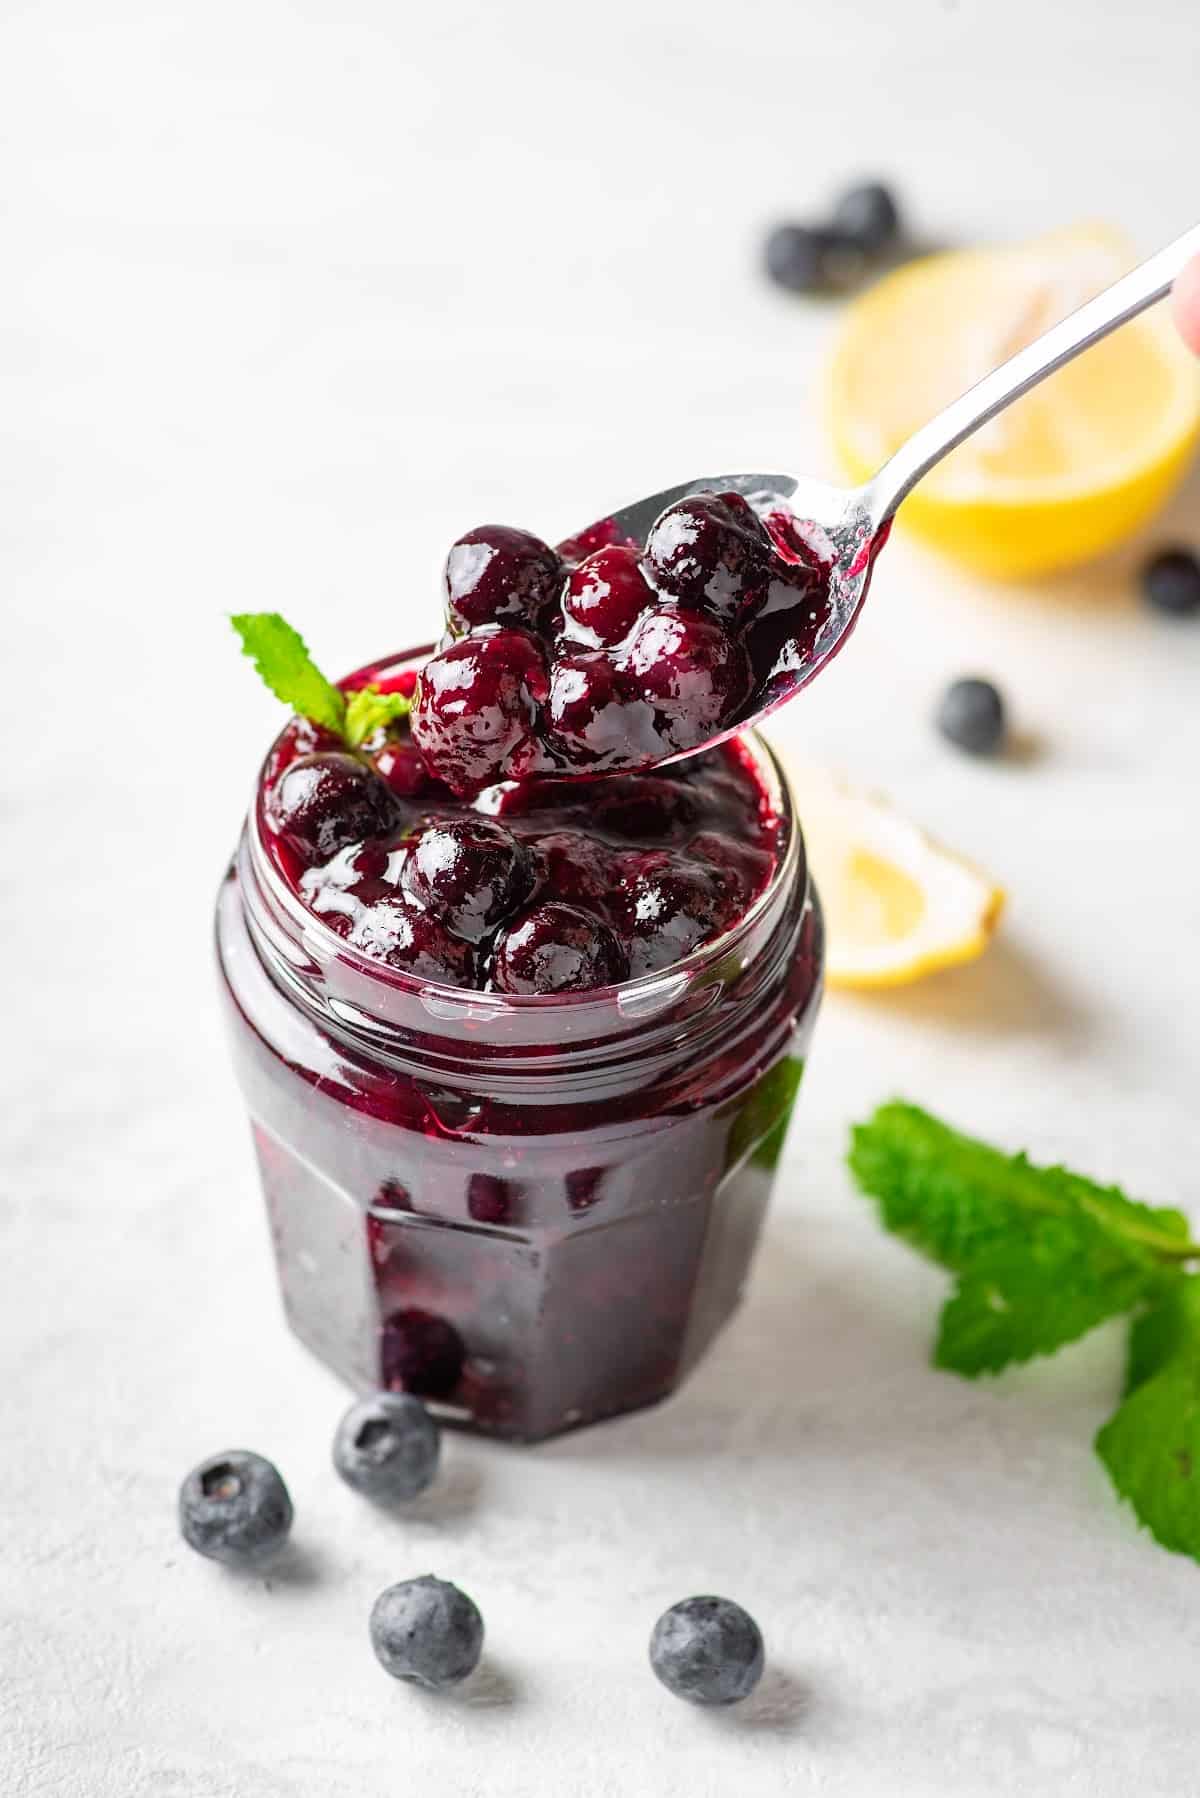 keto blueberry sauce recipe in a glass jar with fresh blueberries, lemon wedges and mint surrounding it